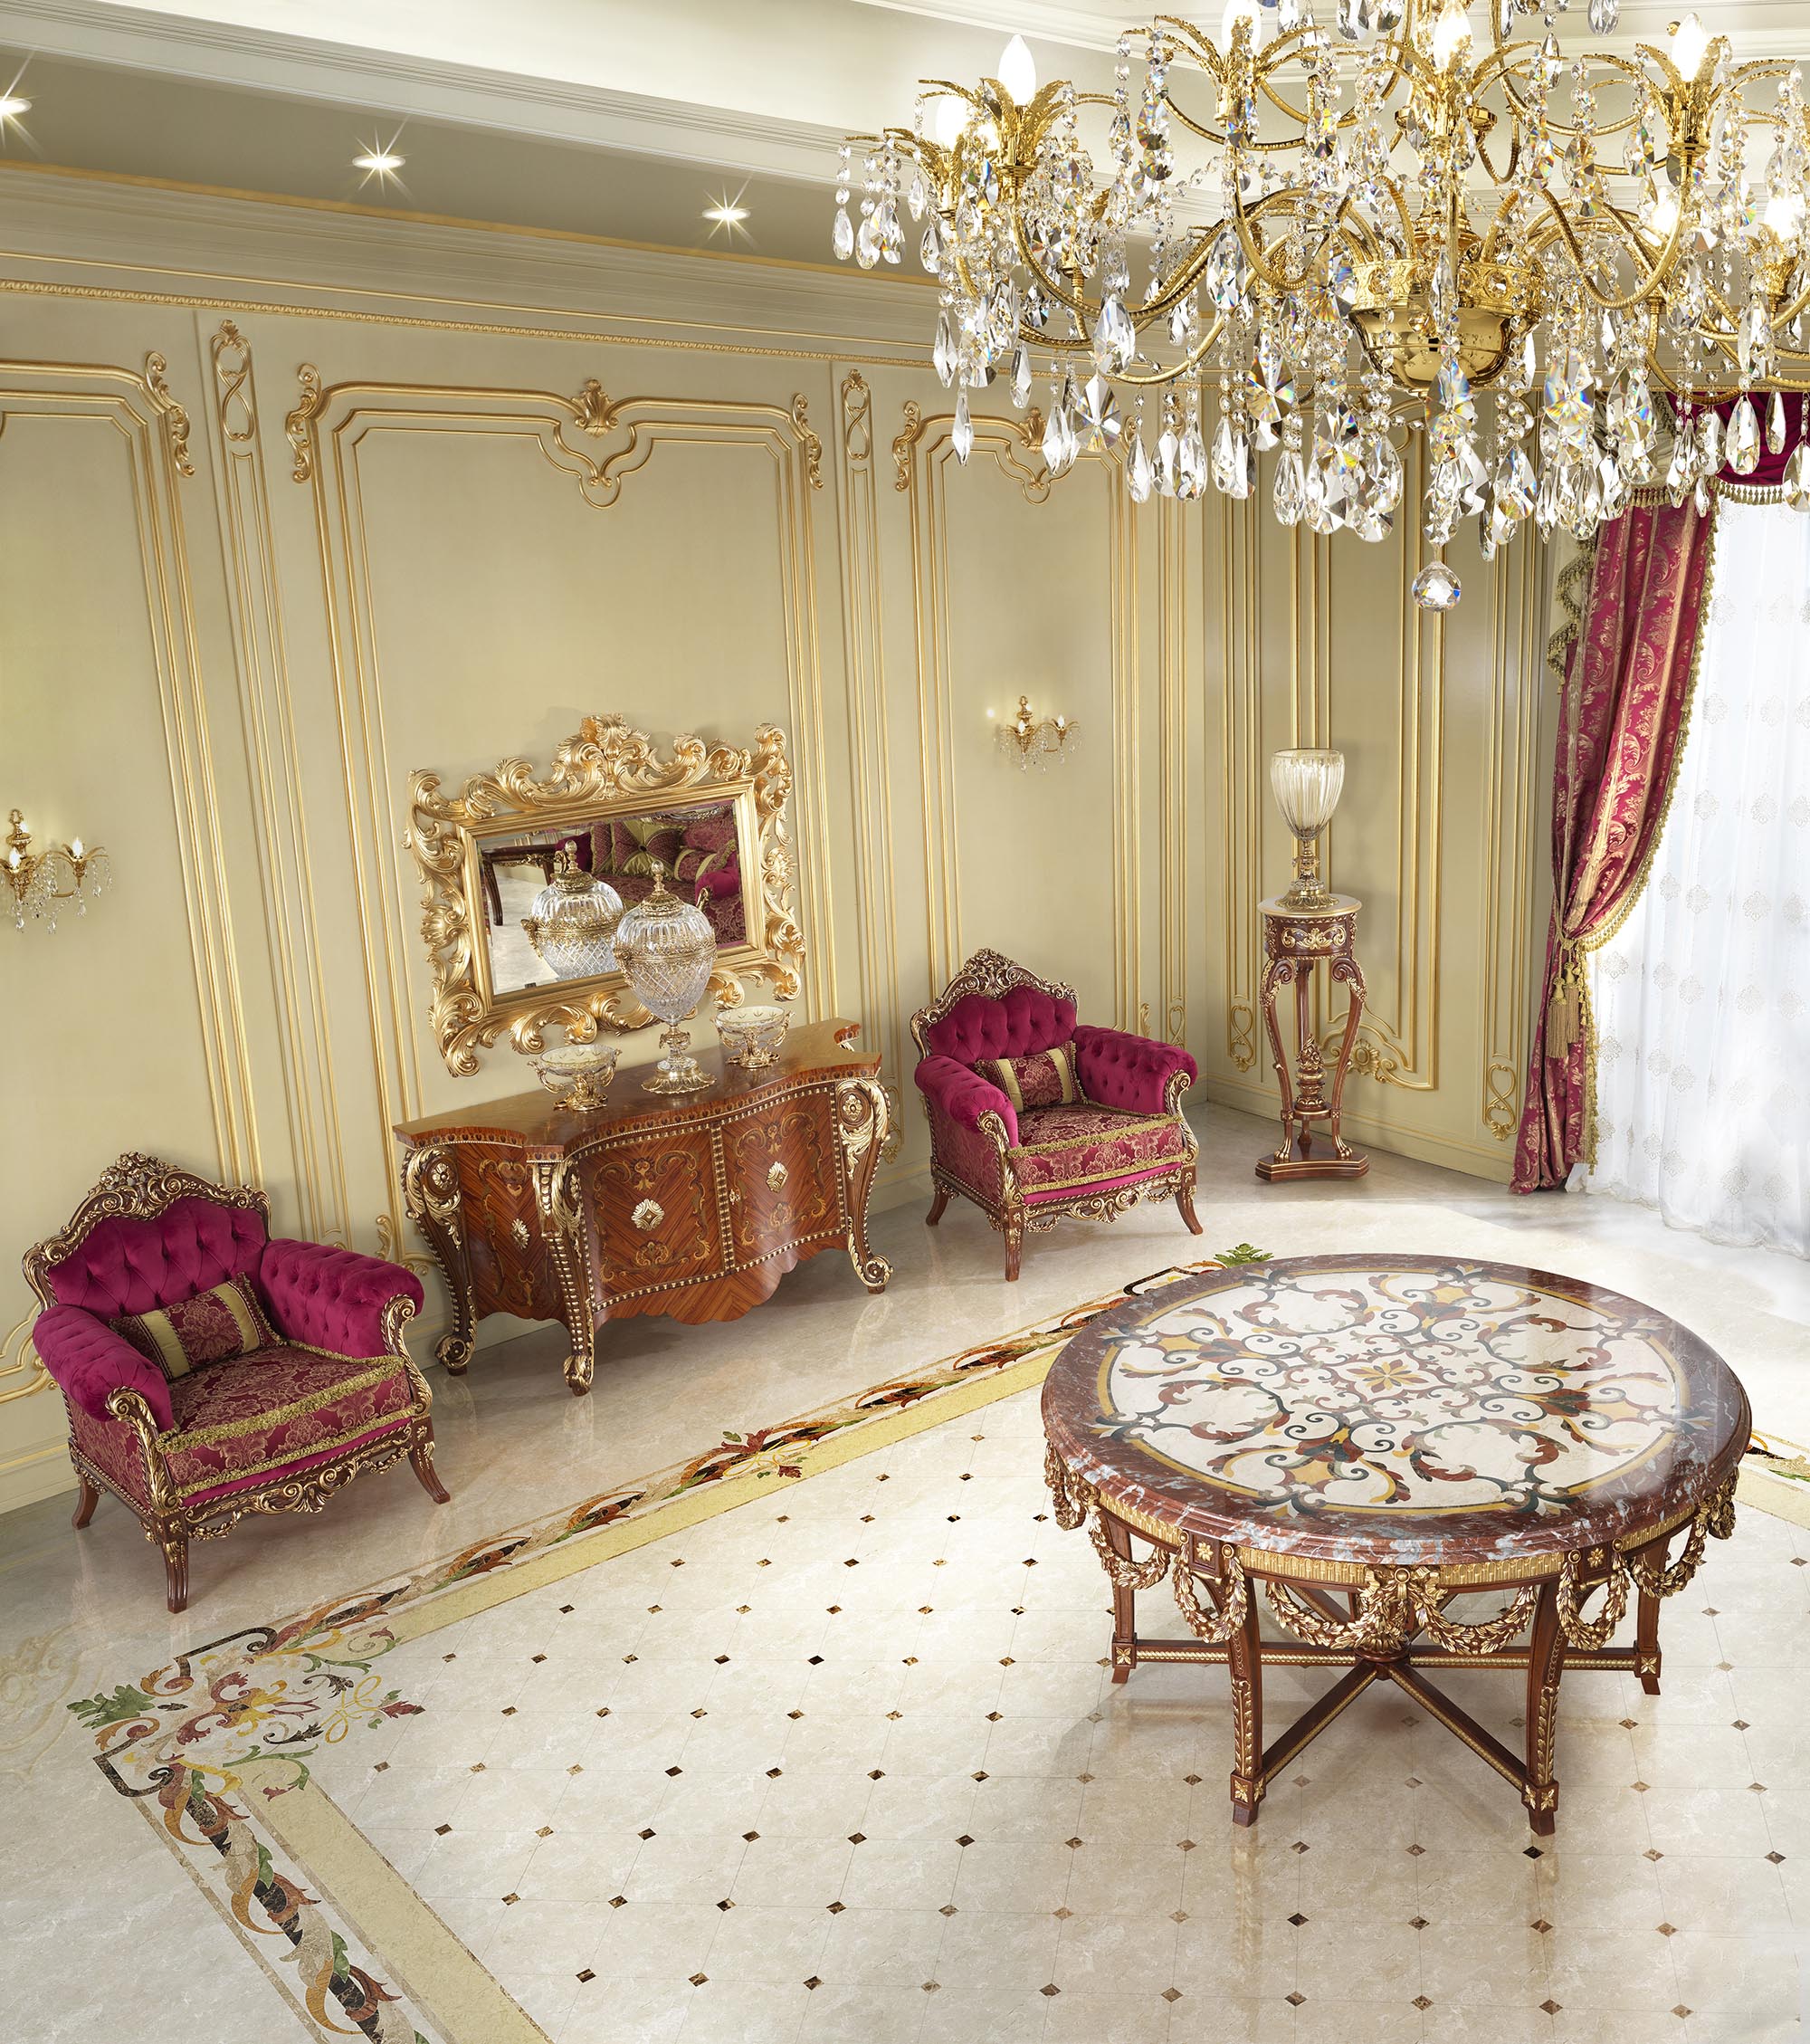 Majestic Palace Interiors: Gold Leaf, Marble, and Opulence